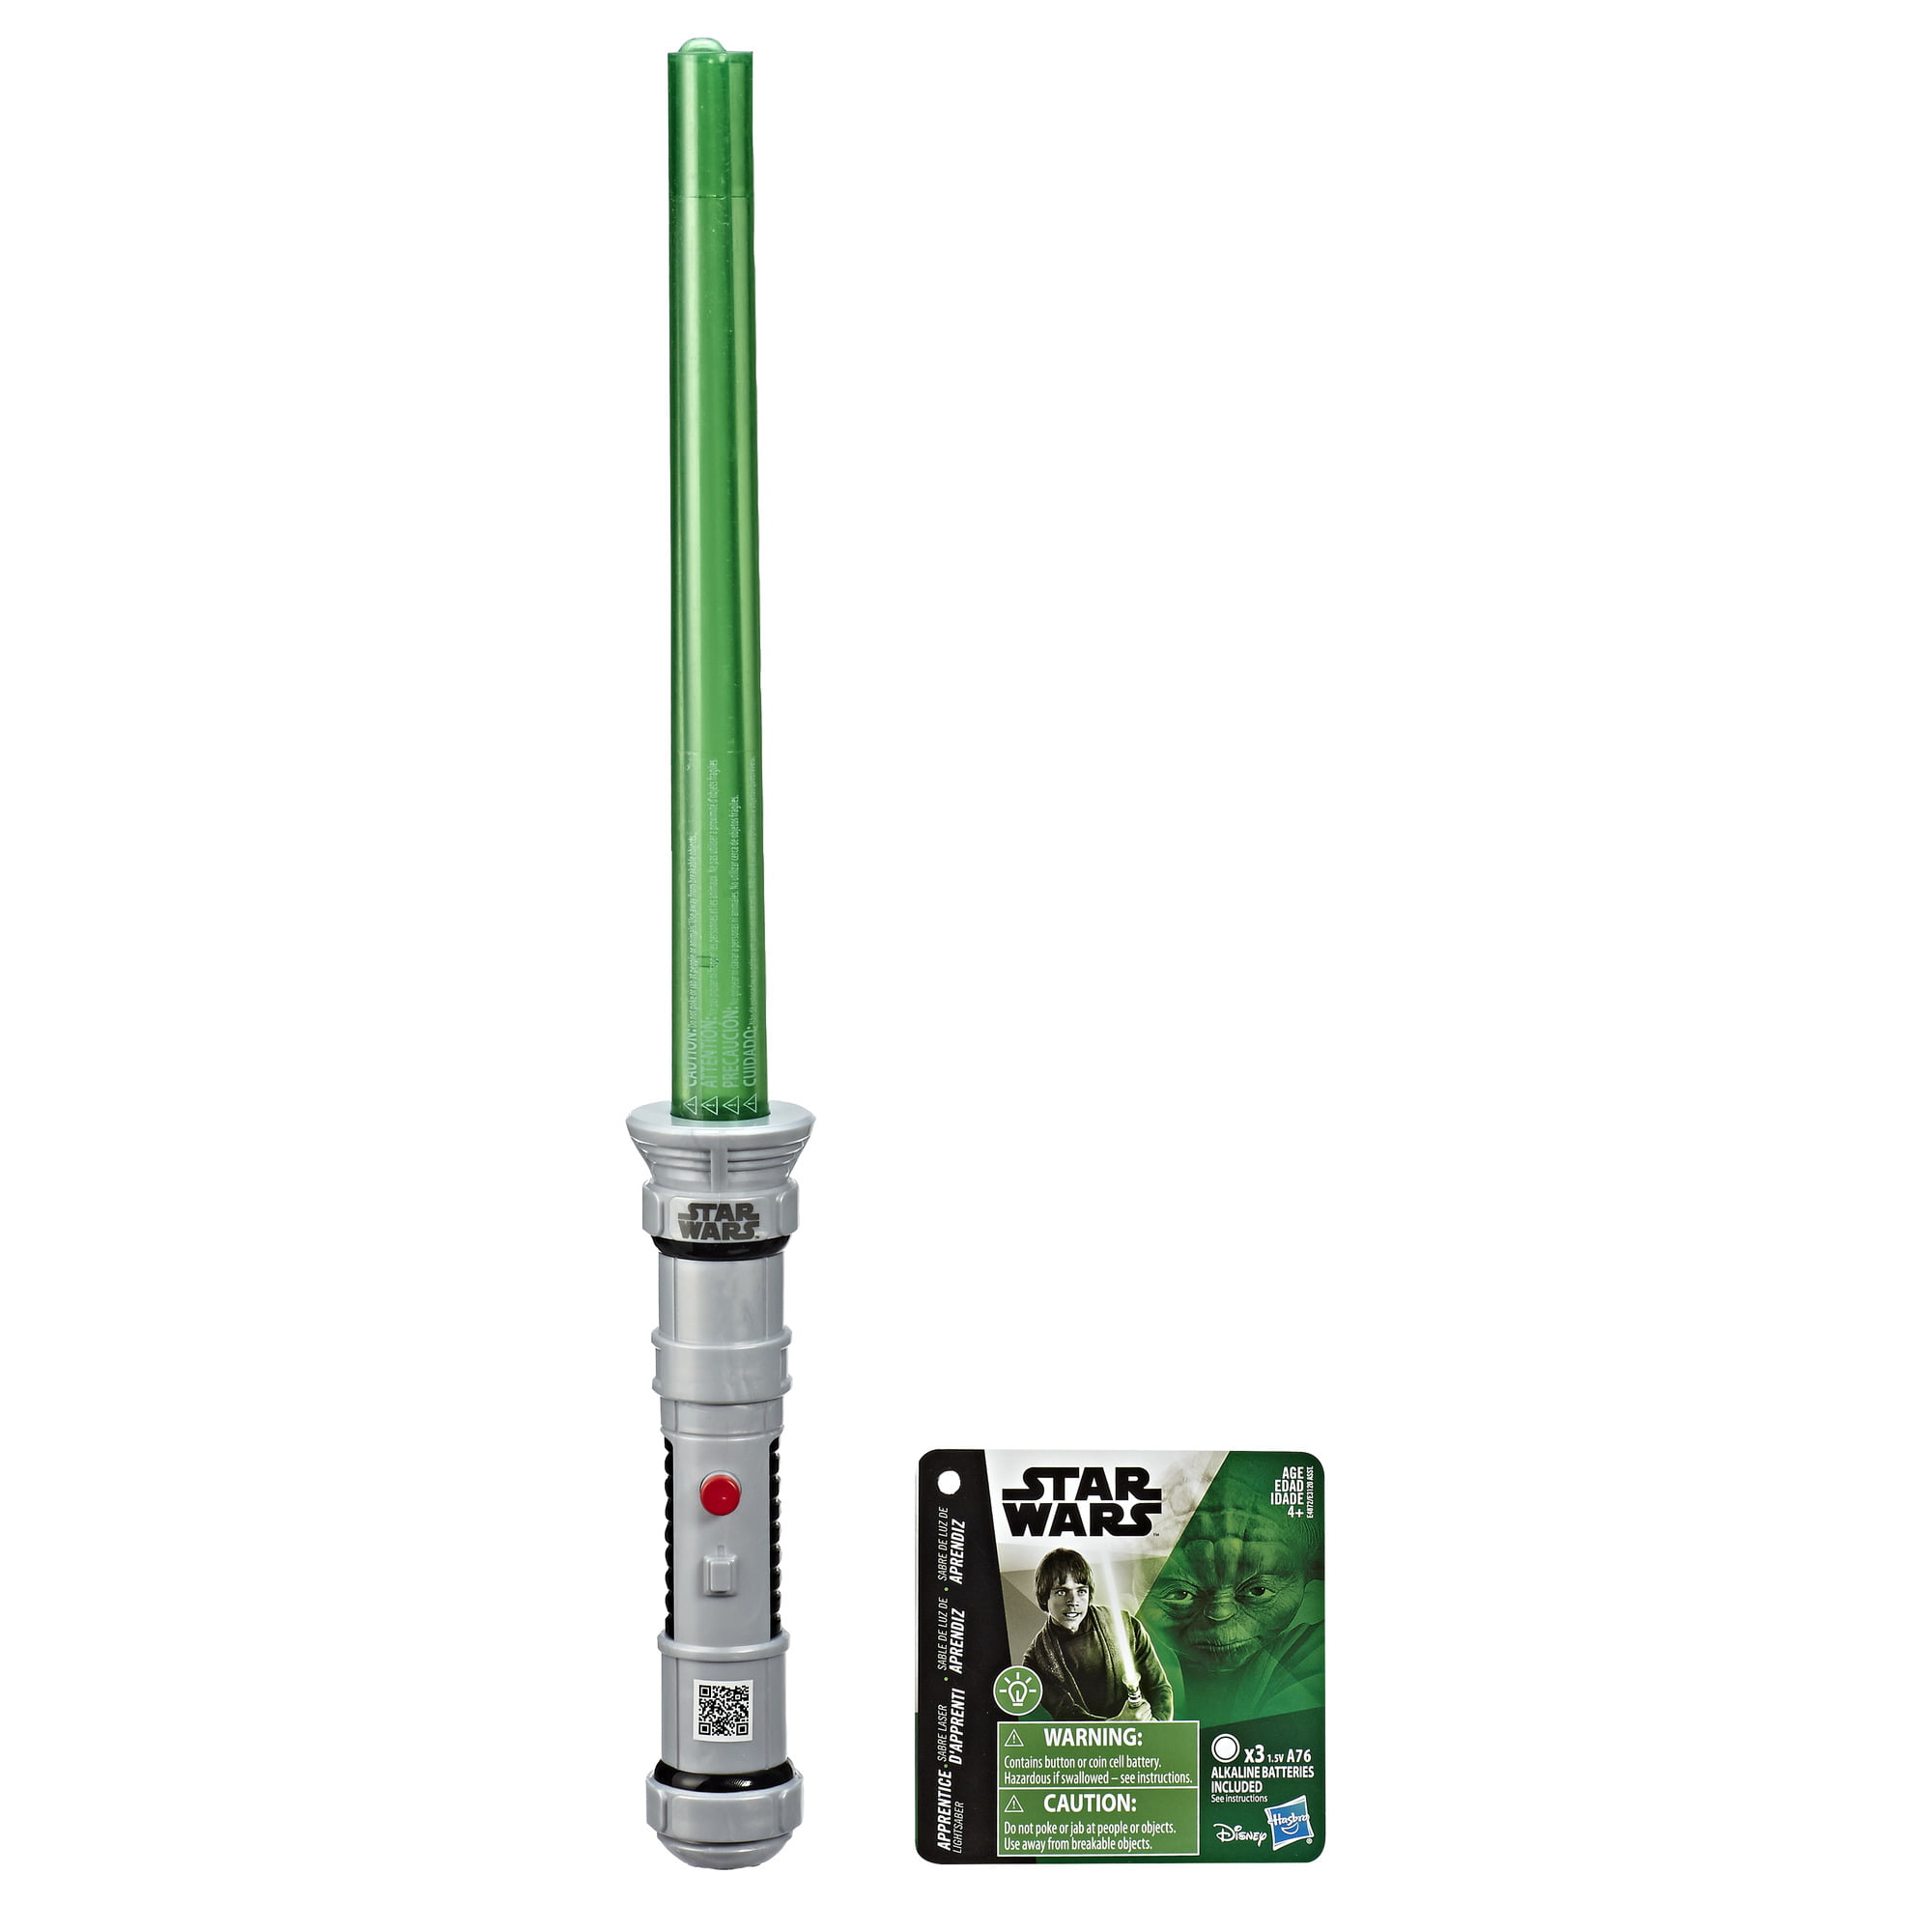 Star Wars Level 1 Green Lightsaber Toy with Extendable Blade -